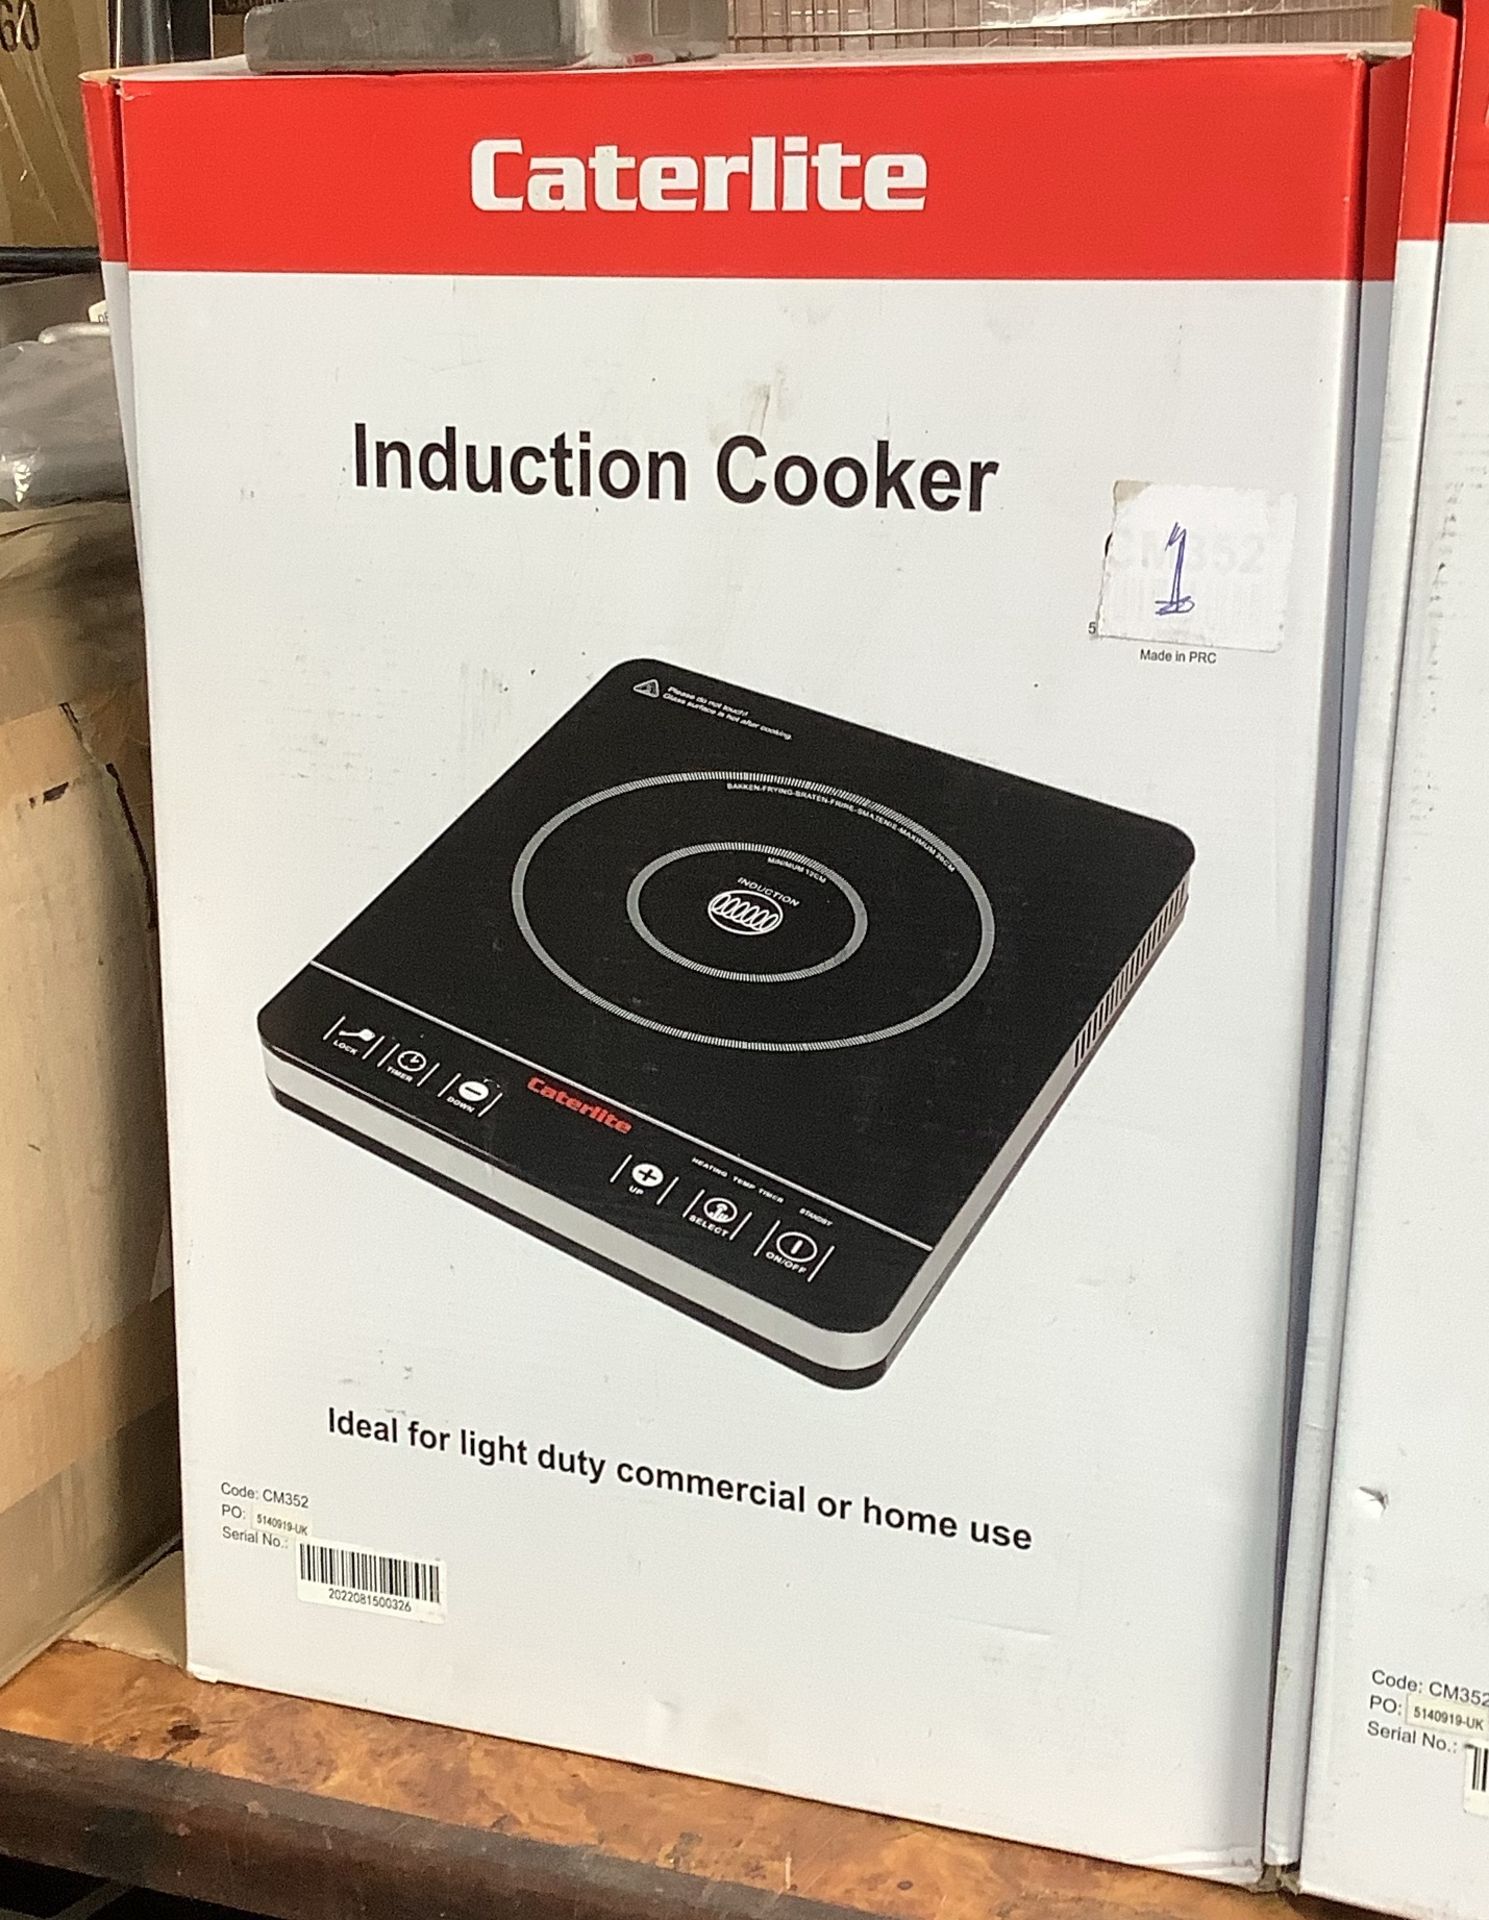 New Caterlite Induction Cooker